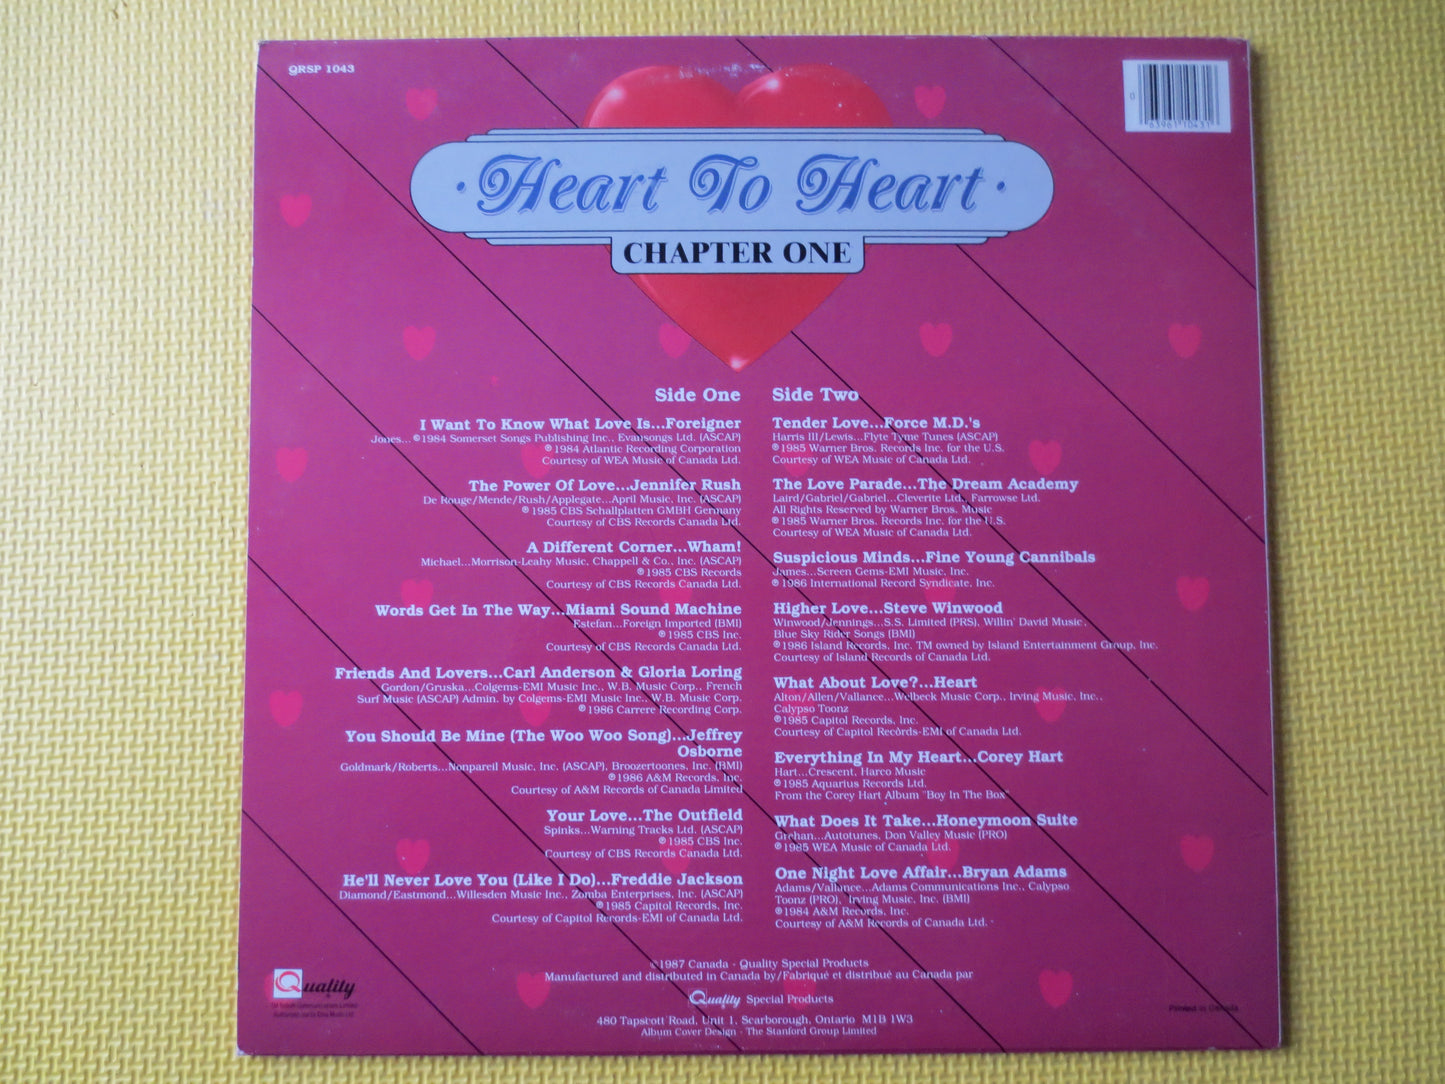 HEART to HEART, HIT Songs, Heart Records, Foreigner Lps, Corey Hart Lp, The Outfield Lp, Jennifer Rush Lps, 1987 Records